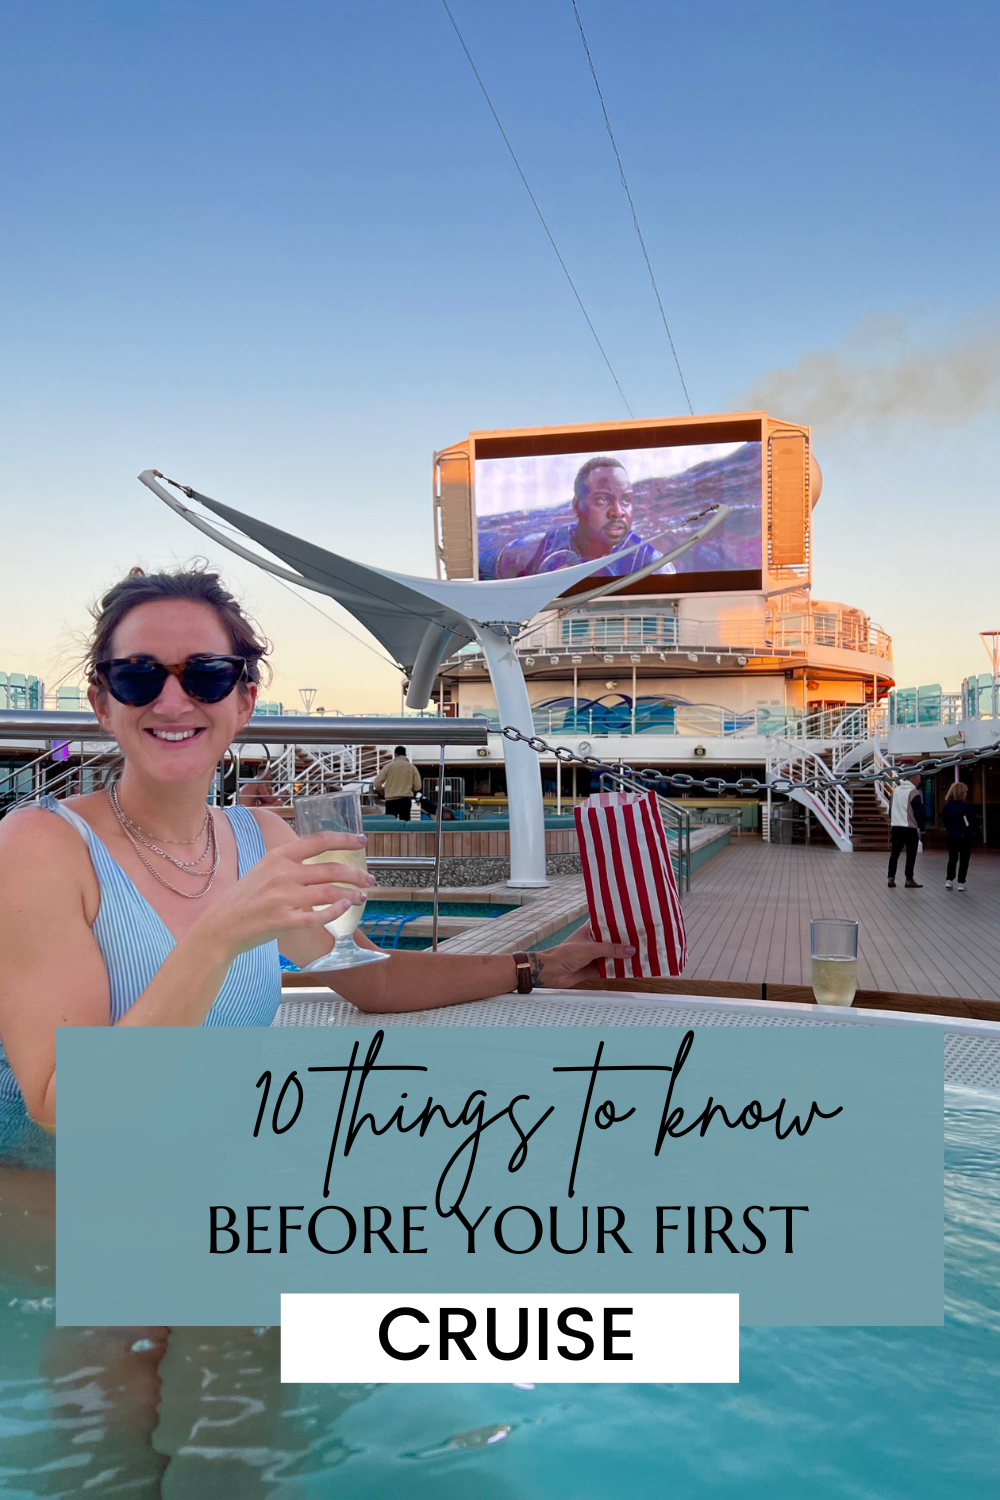 10 things to know before your first cruise